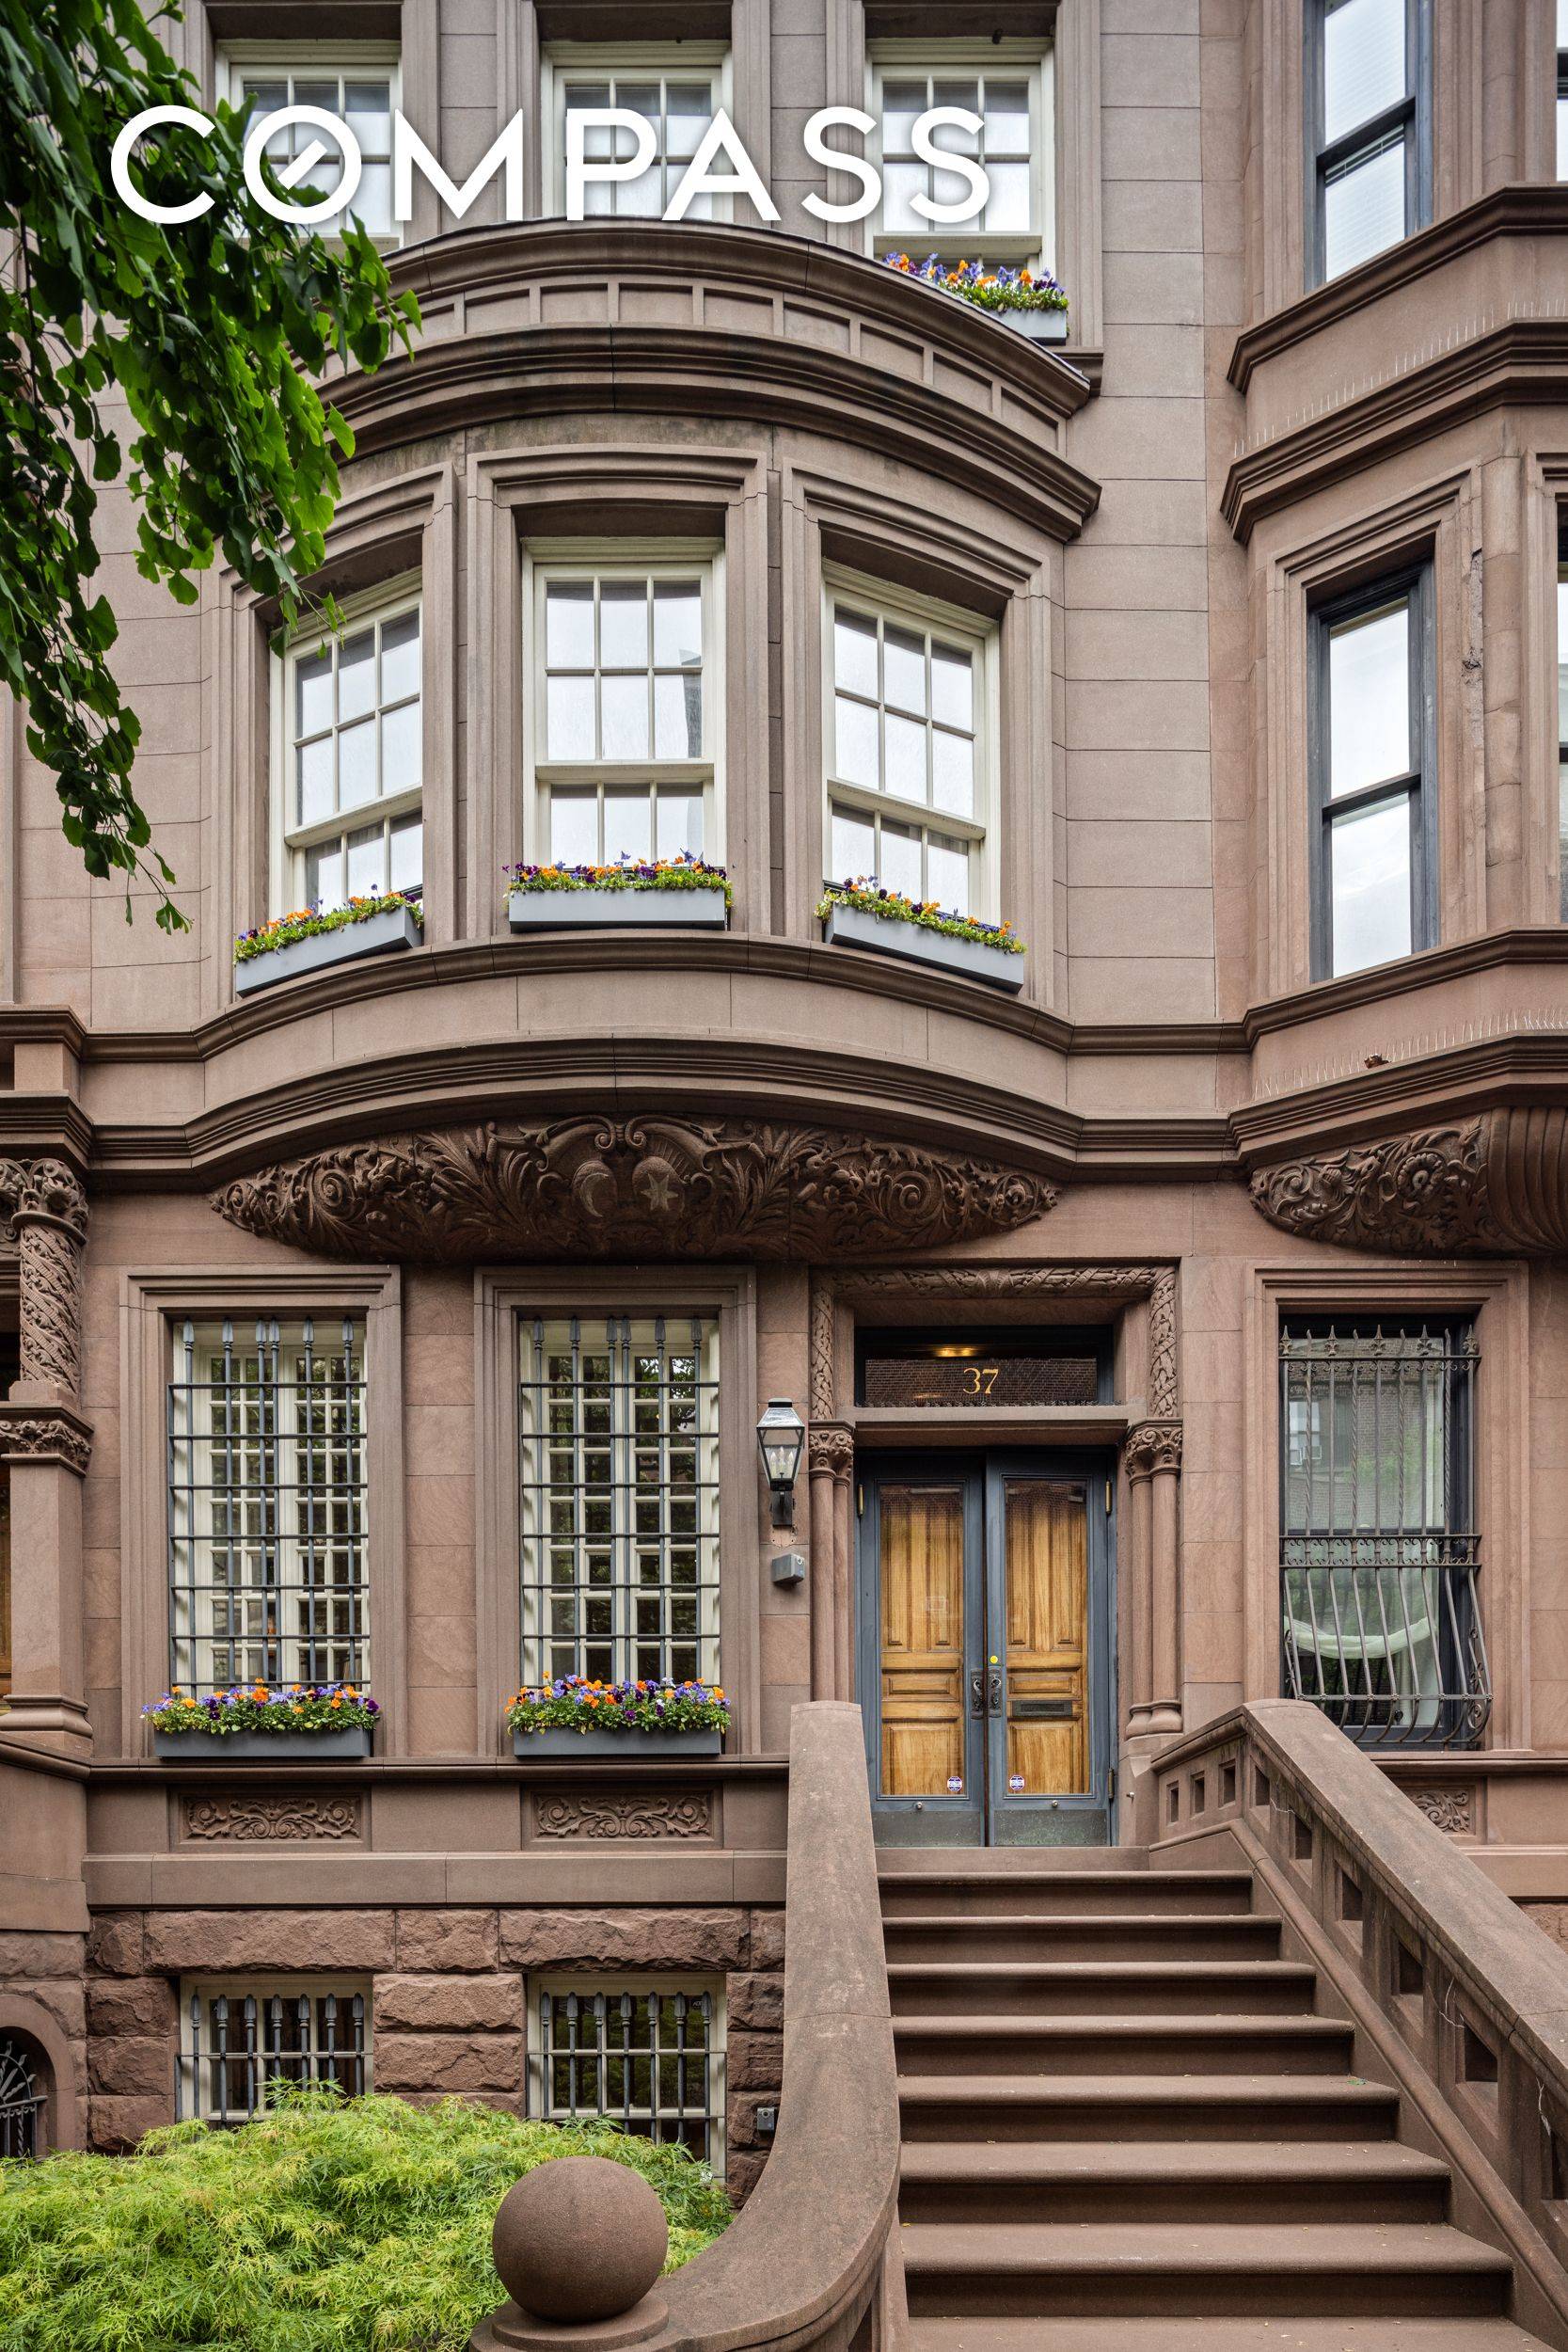 37 West 70th Street is a distinguished 20 wide single family brownstone, rich in well preserved historic detail, a half block west of Central Park.